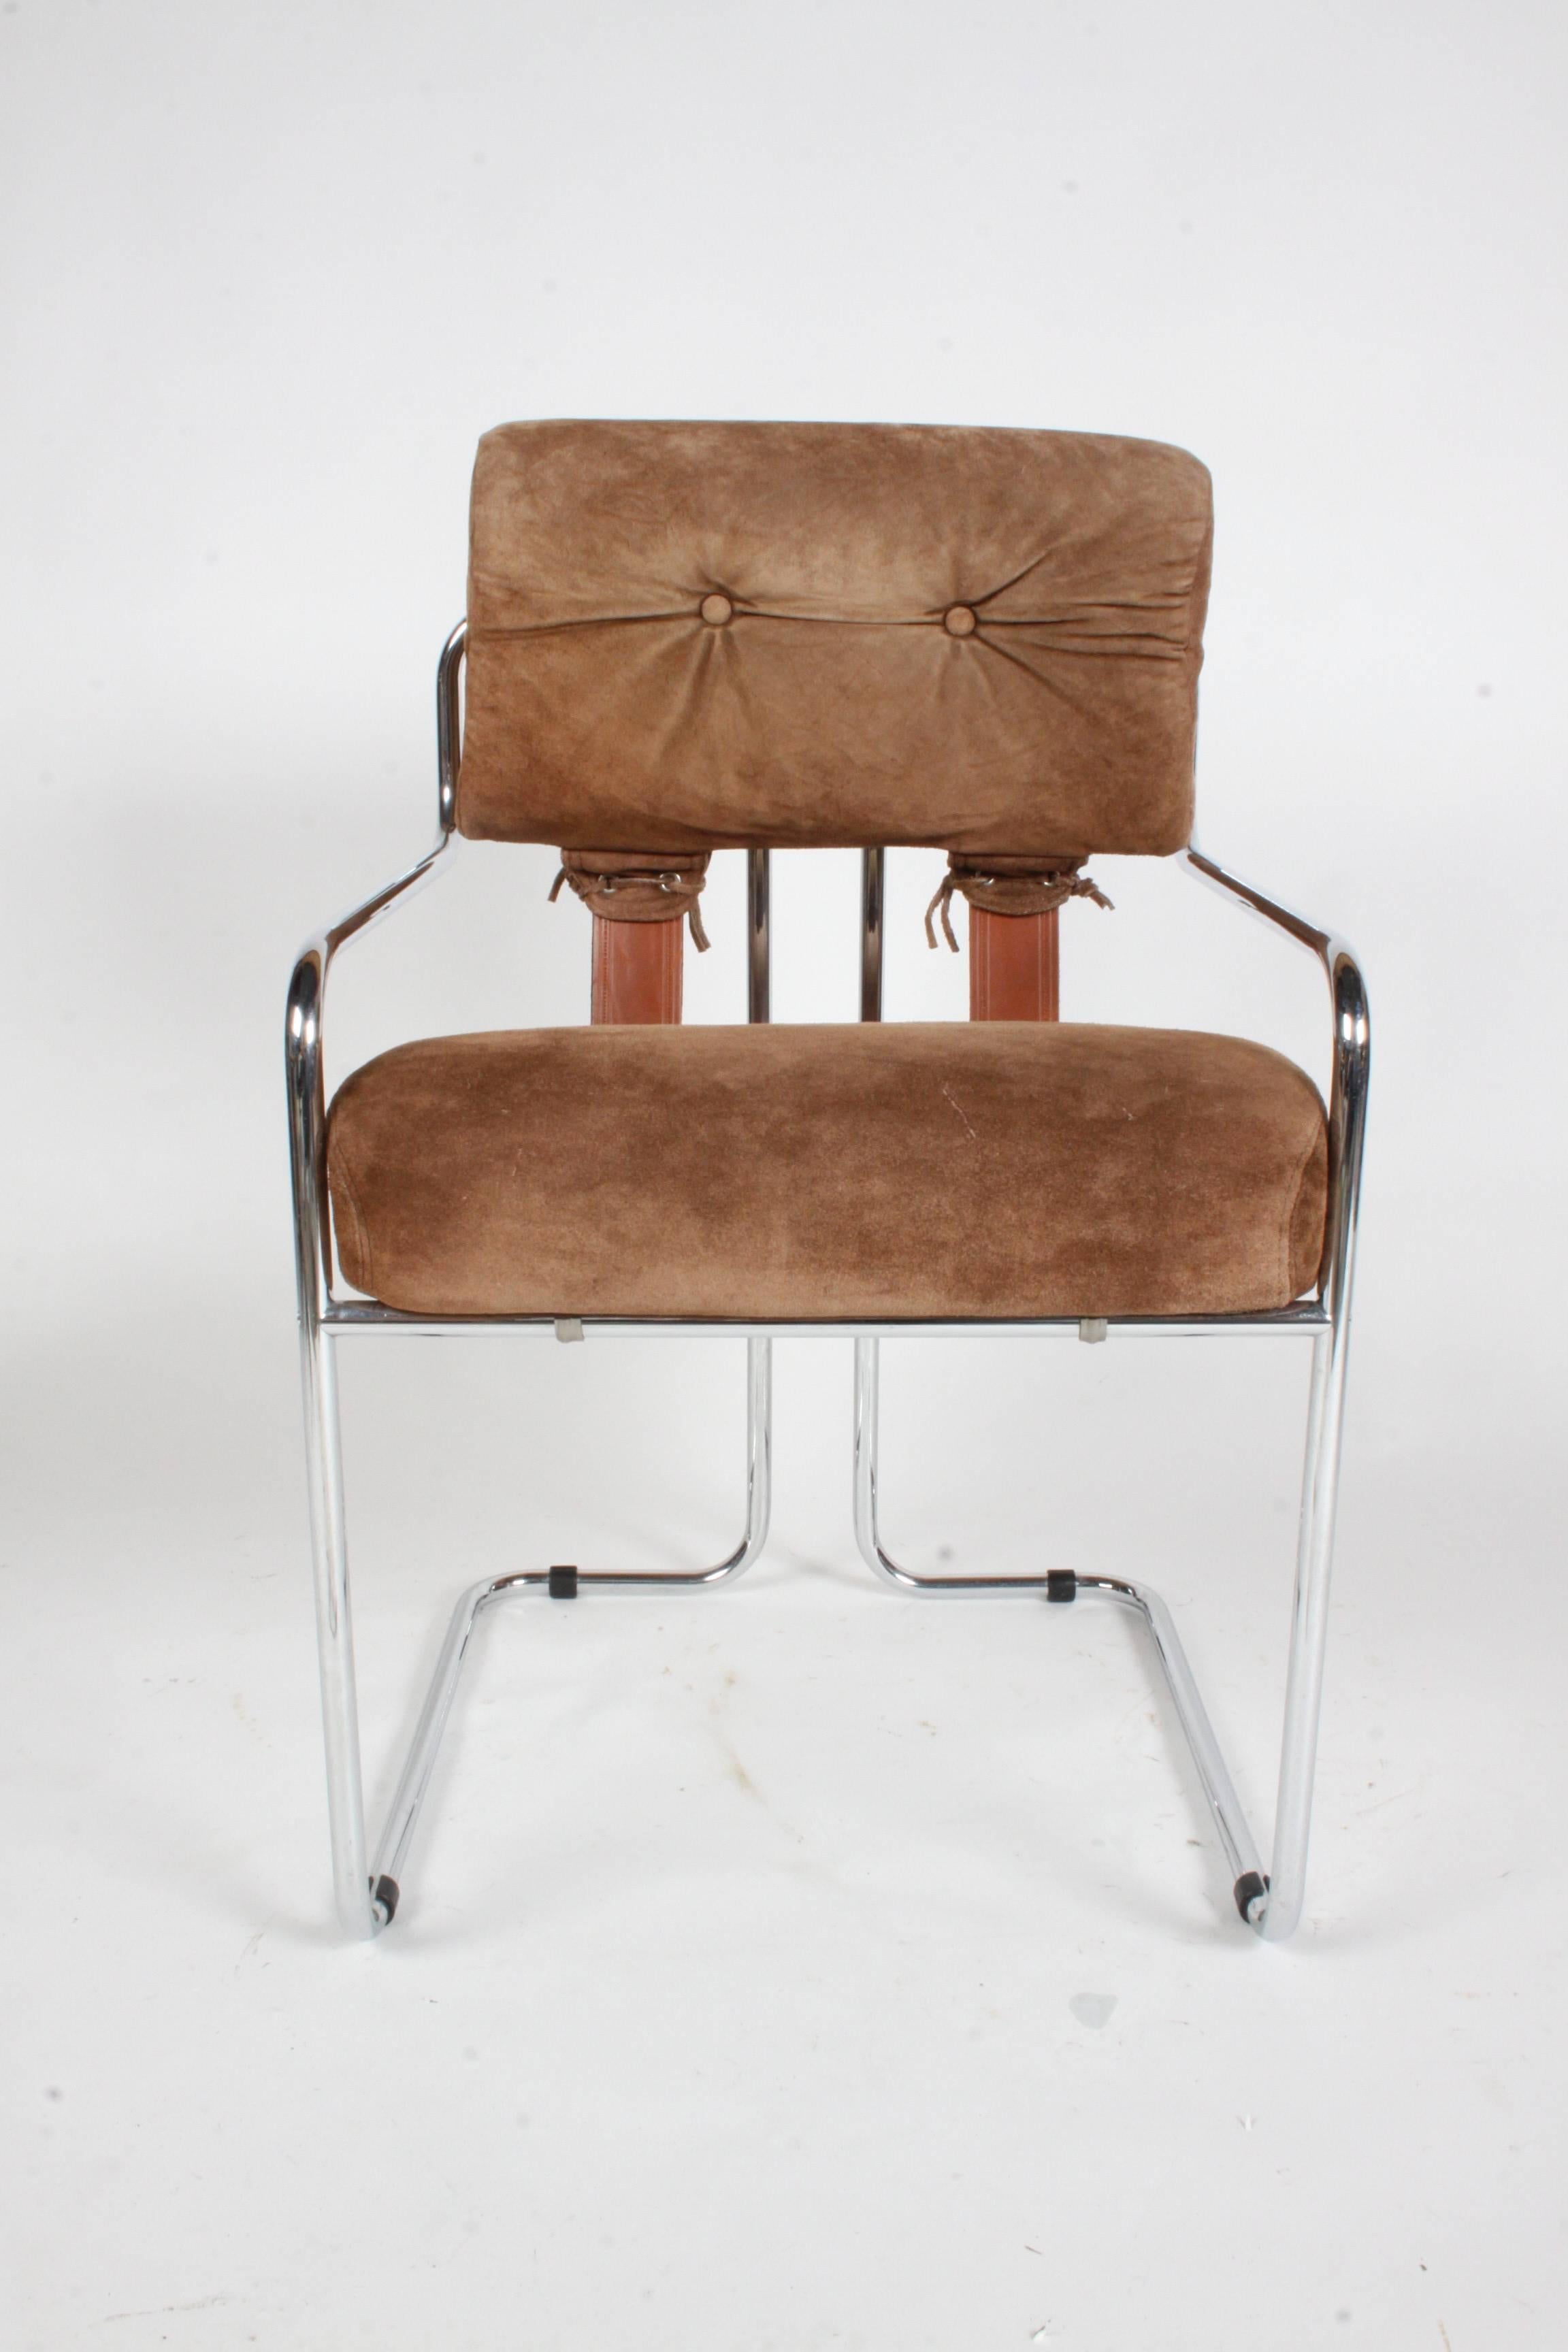 Rare set of 12 Tucroma brown suede dining chairs designed by Guido Faleschini for Pace, circa 1970s. Combined sets from same original owner, six chairs are a slightly darker brown, most chairs stamped made in Italy or have paper labels. Overall very